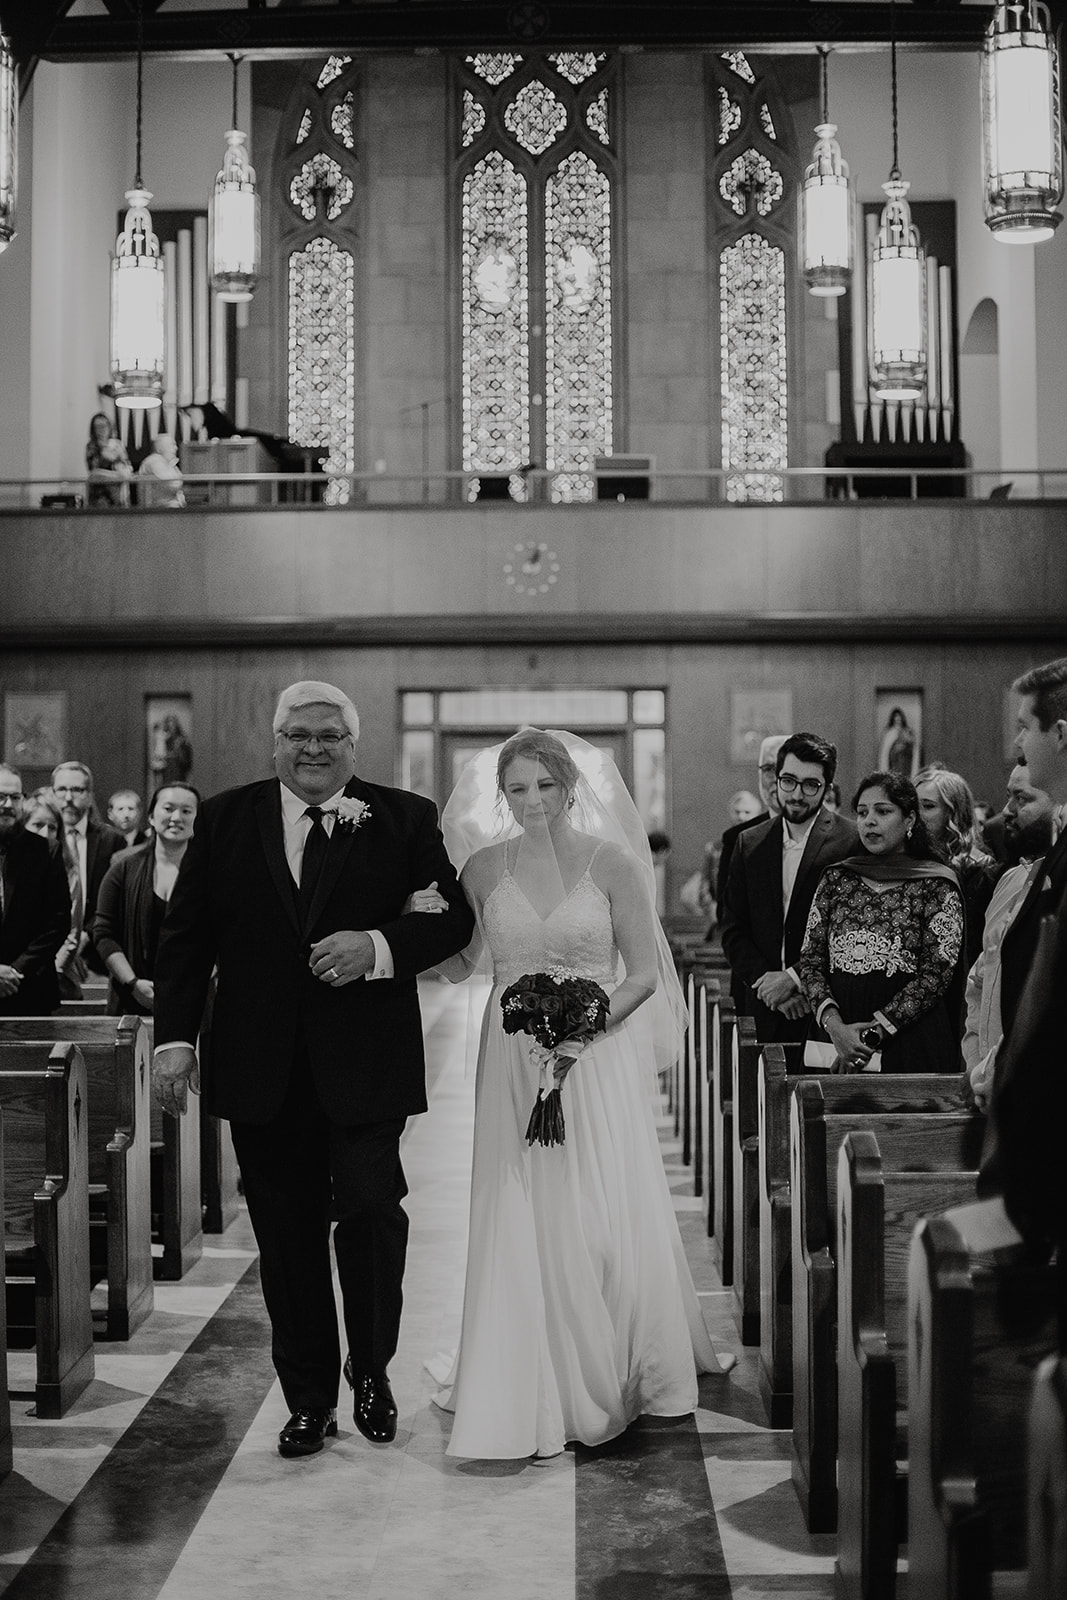 father walks daughter down the aisle to marry at church